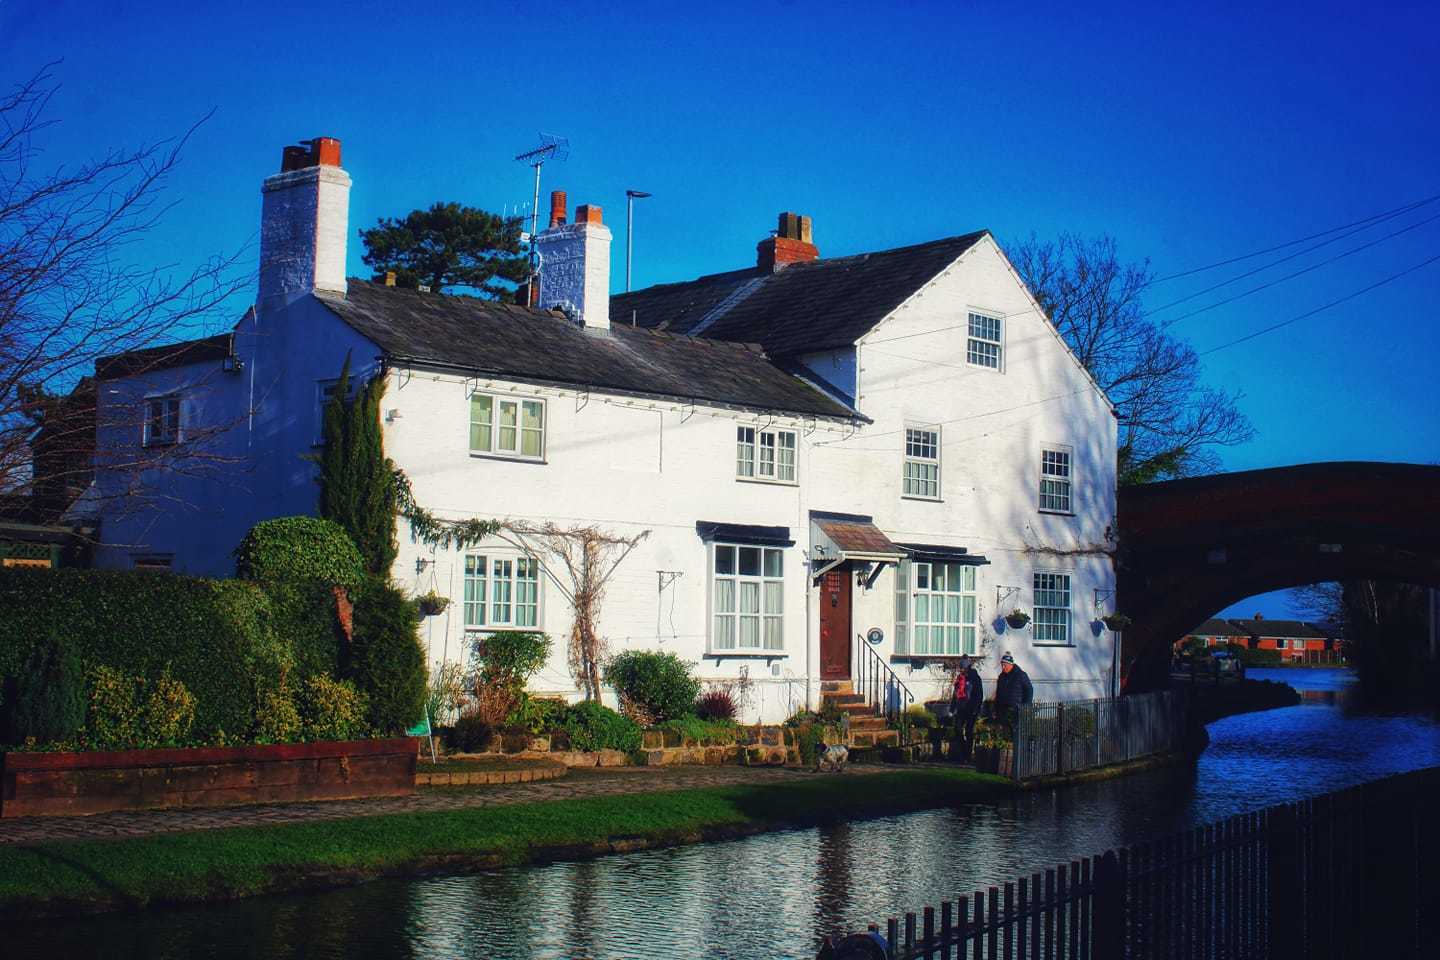 Sootys house in Lymm by Tony Crawford